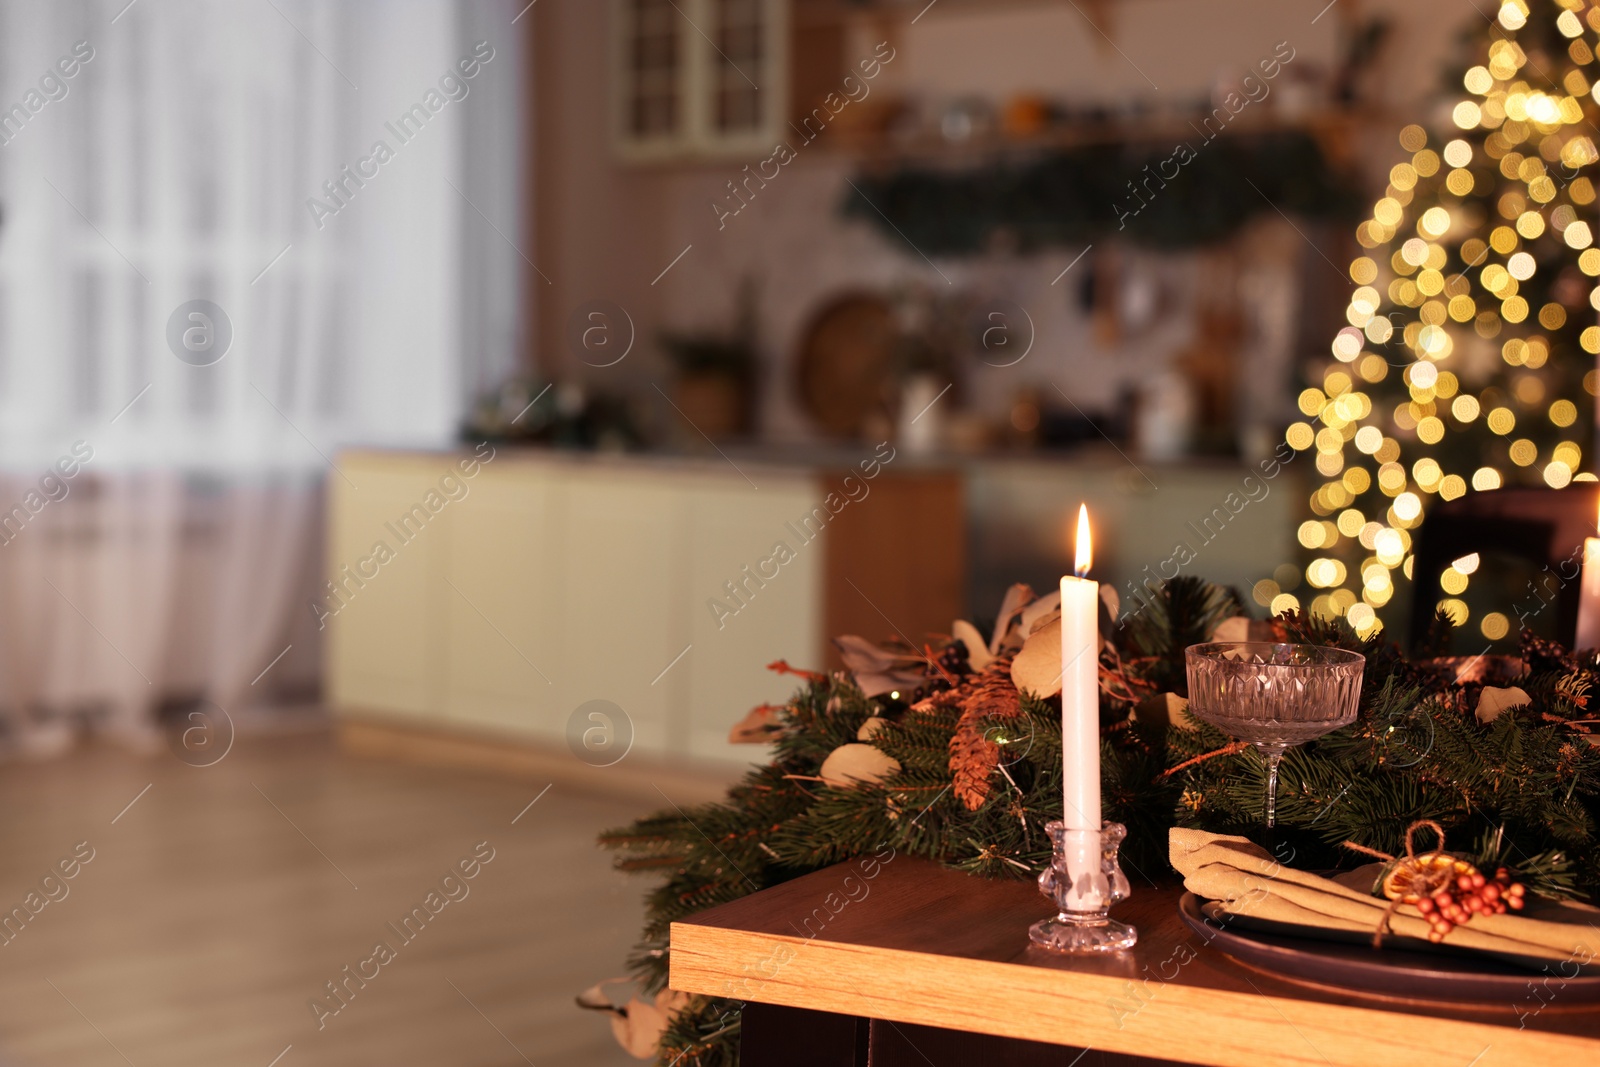 Photo of Stylish room with burning candle, Christmas tree and festive decor, space for text. Interior design